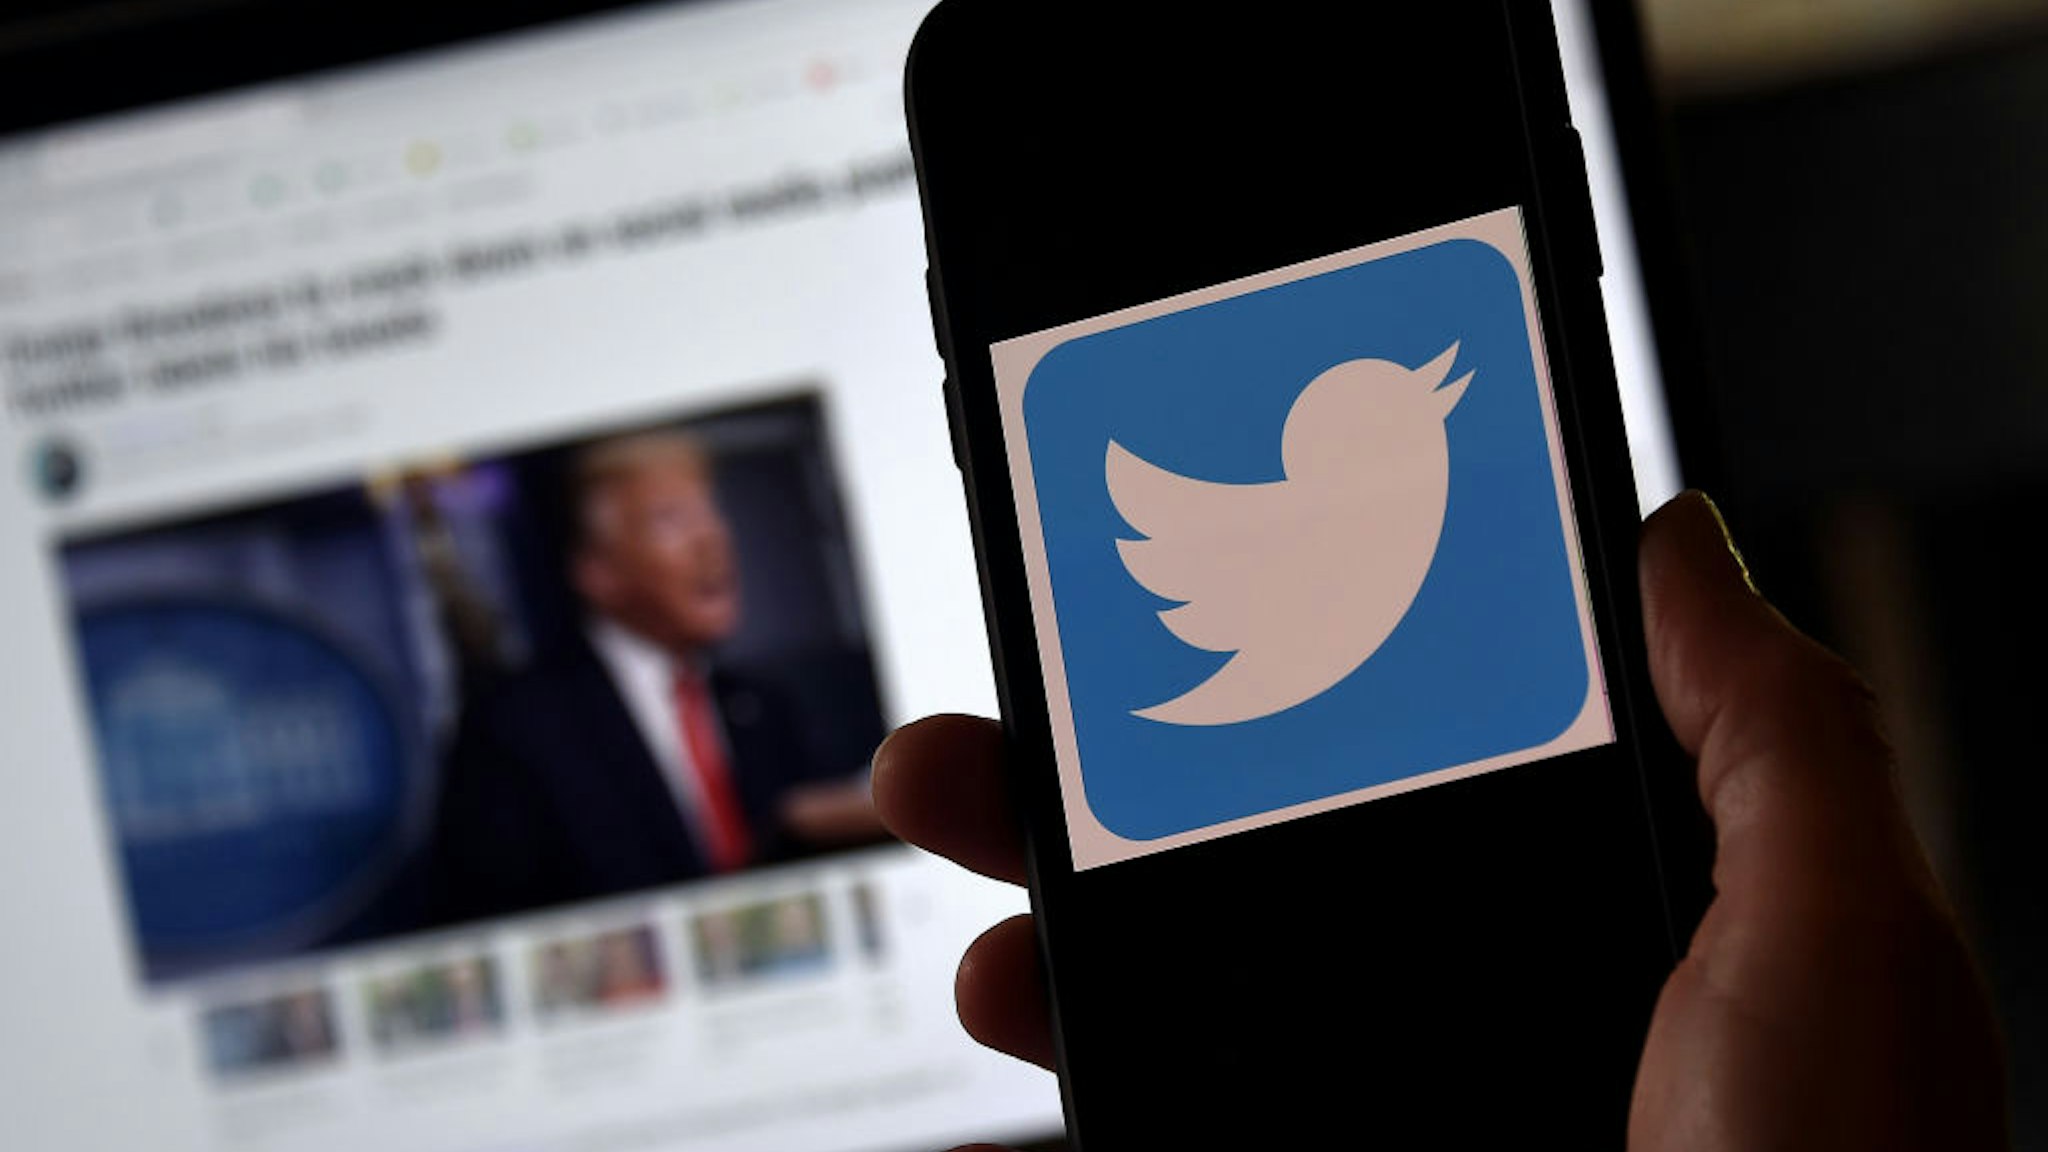 In this photo illustration, a Twitter logo is displayed on a mobile phone with President Trump's Twitter page shown in the background on May 27, 2020, in Arlington, Virginia. - US President Donald Trump threatened Wednesday to shutter social media platforms after Twitter for the first time acted against his false tweets, prompting the enraged Republican to double down on unsubstantiated claims and conspiracy theories. Twitter tagged two of Trump's tweets in which he claimed that more mail-in voting would lead to what he called a "Rigged Election" this November. (Photo by Olivier DOULIERY / AFP) (Photo by OLIVIER DOULIERY/AFP via Getty Images)